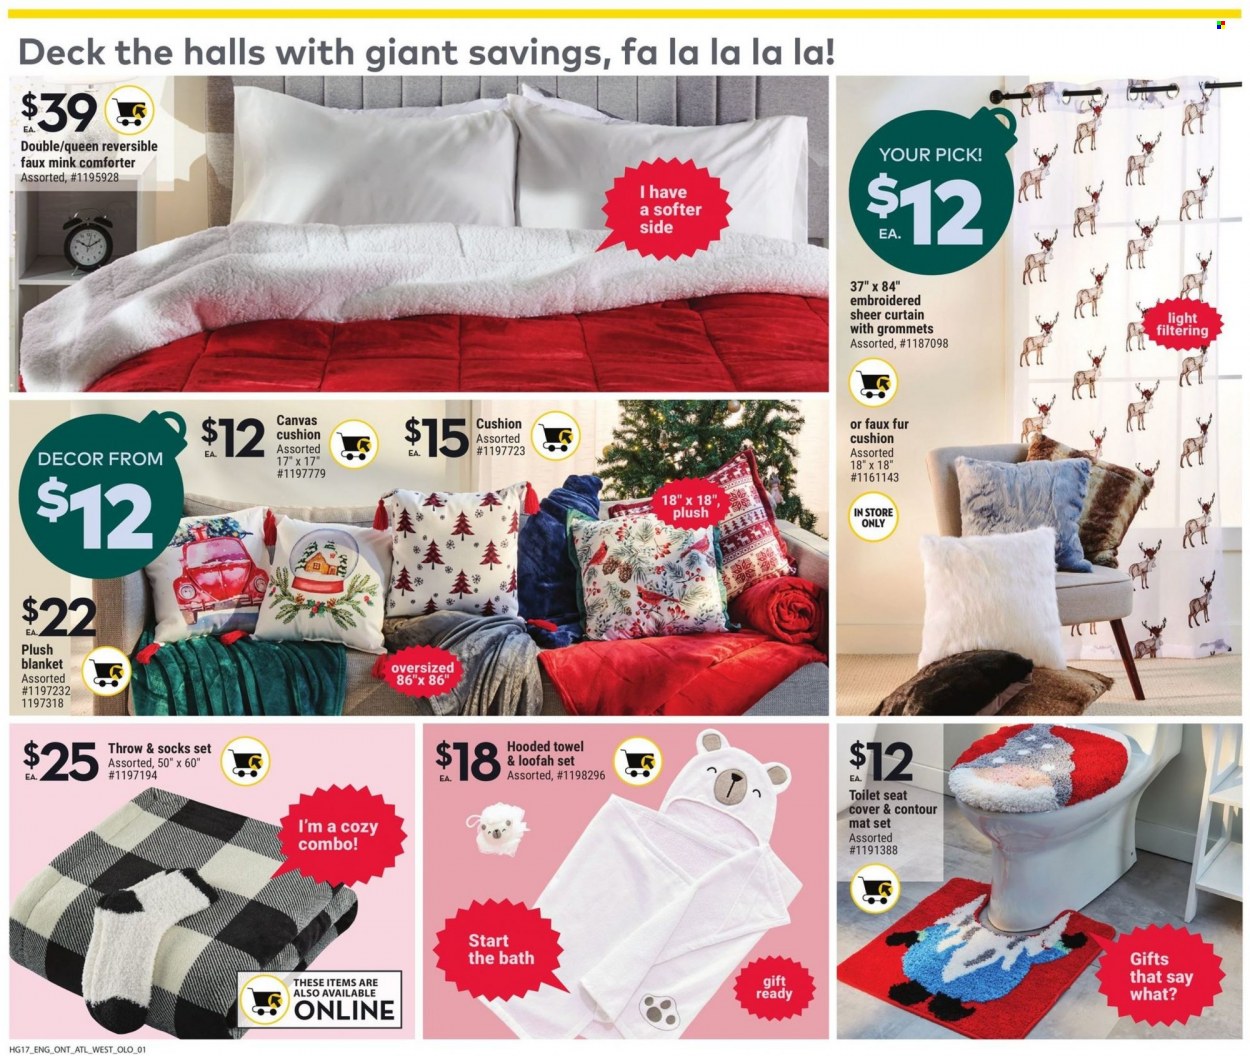 thumbnail - Giant Tiger Flyer - November 23, 2022 - November 29, 2022 - Sales products - Halls, contour, canvas, blanket, cushion, comforter, curtain, towel, socks, toilet seat, car seat cover. Page 5.